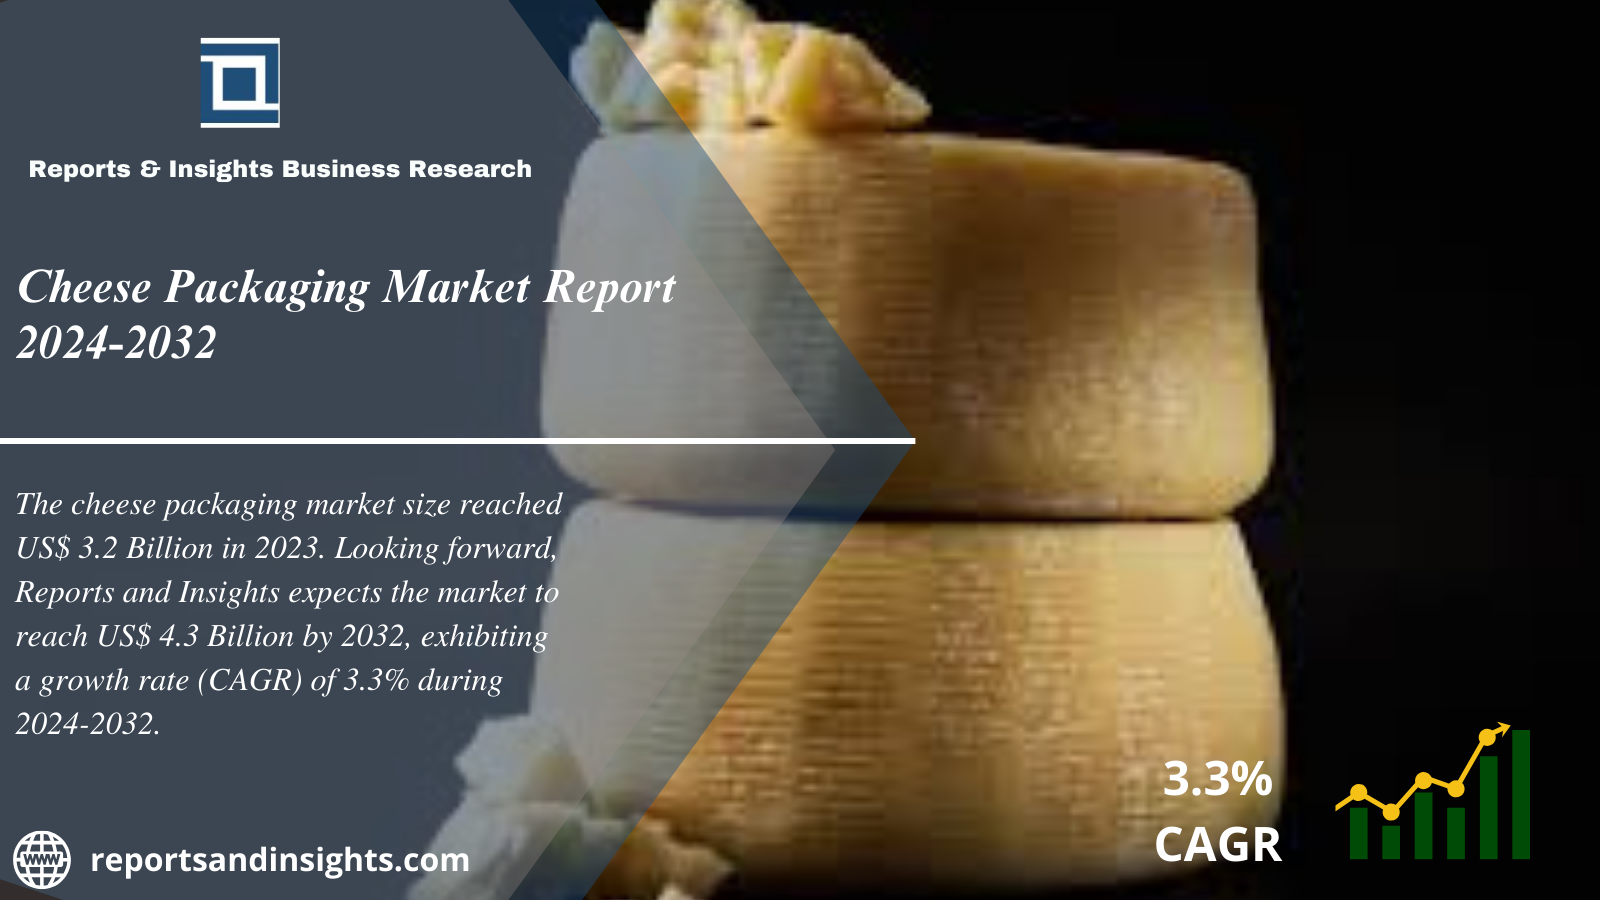 Cheese Packaging Market 2024 to 2032: Size, Share, Demand, And Future Scope